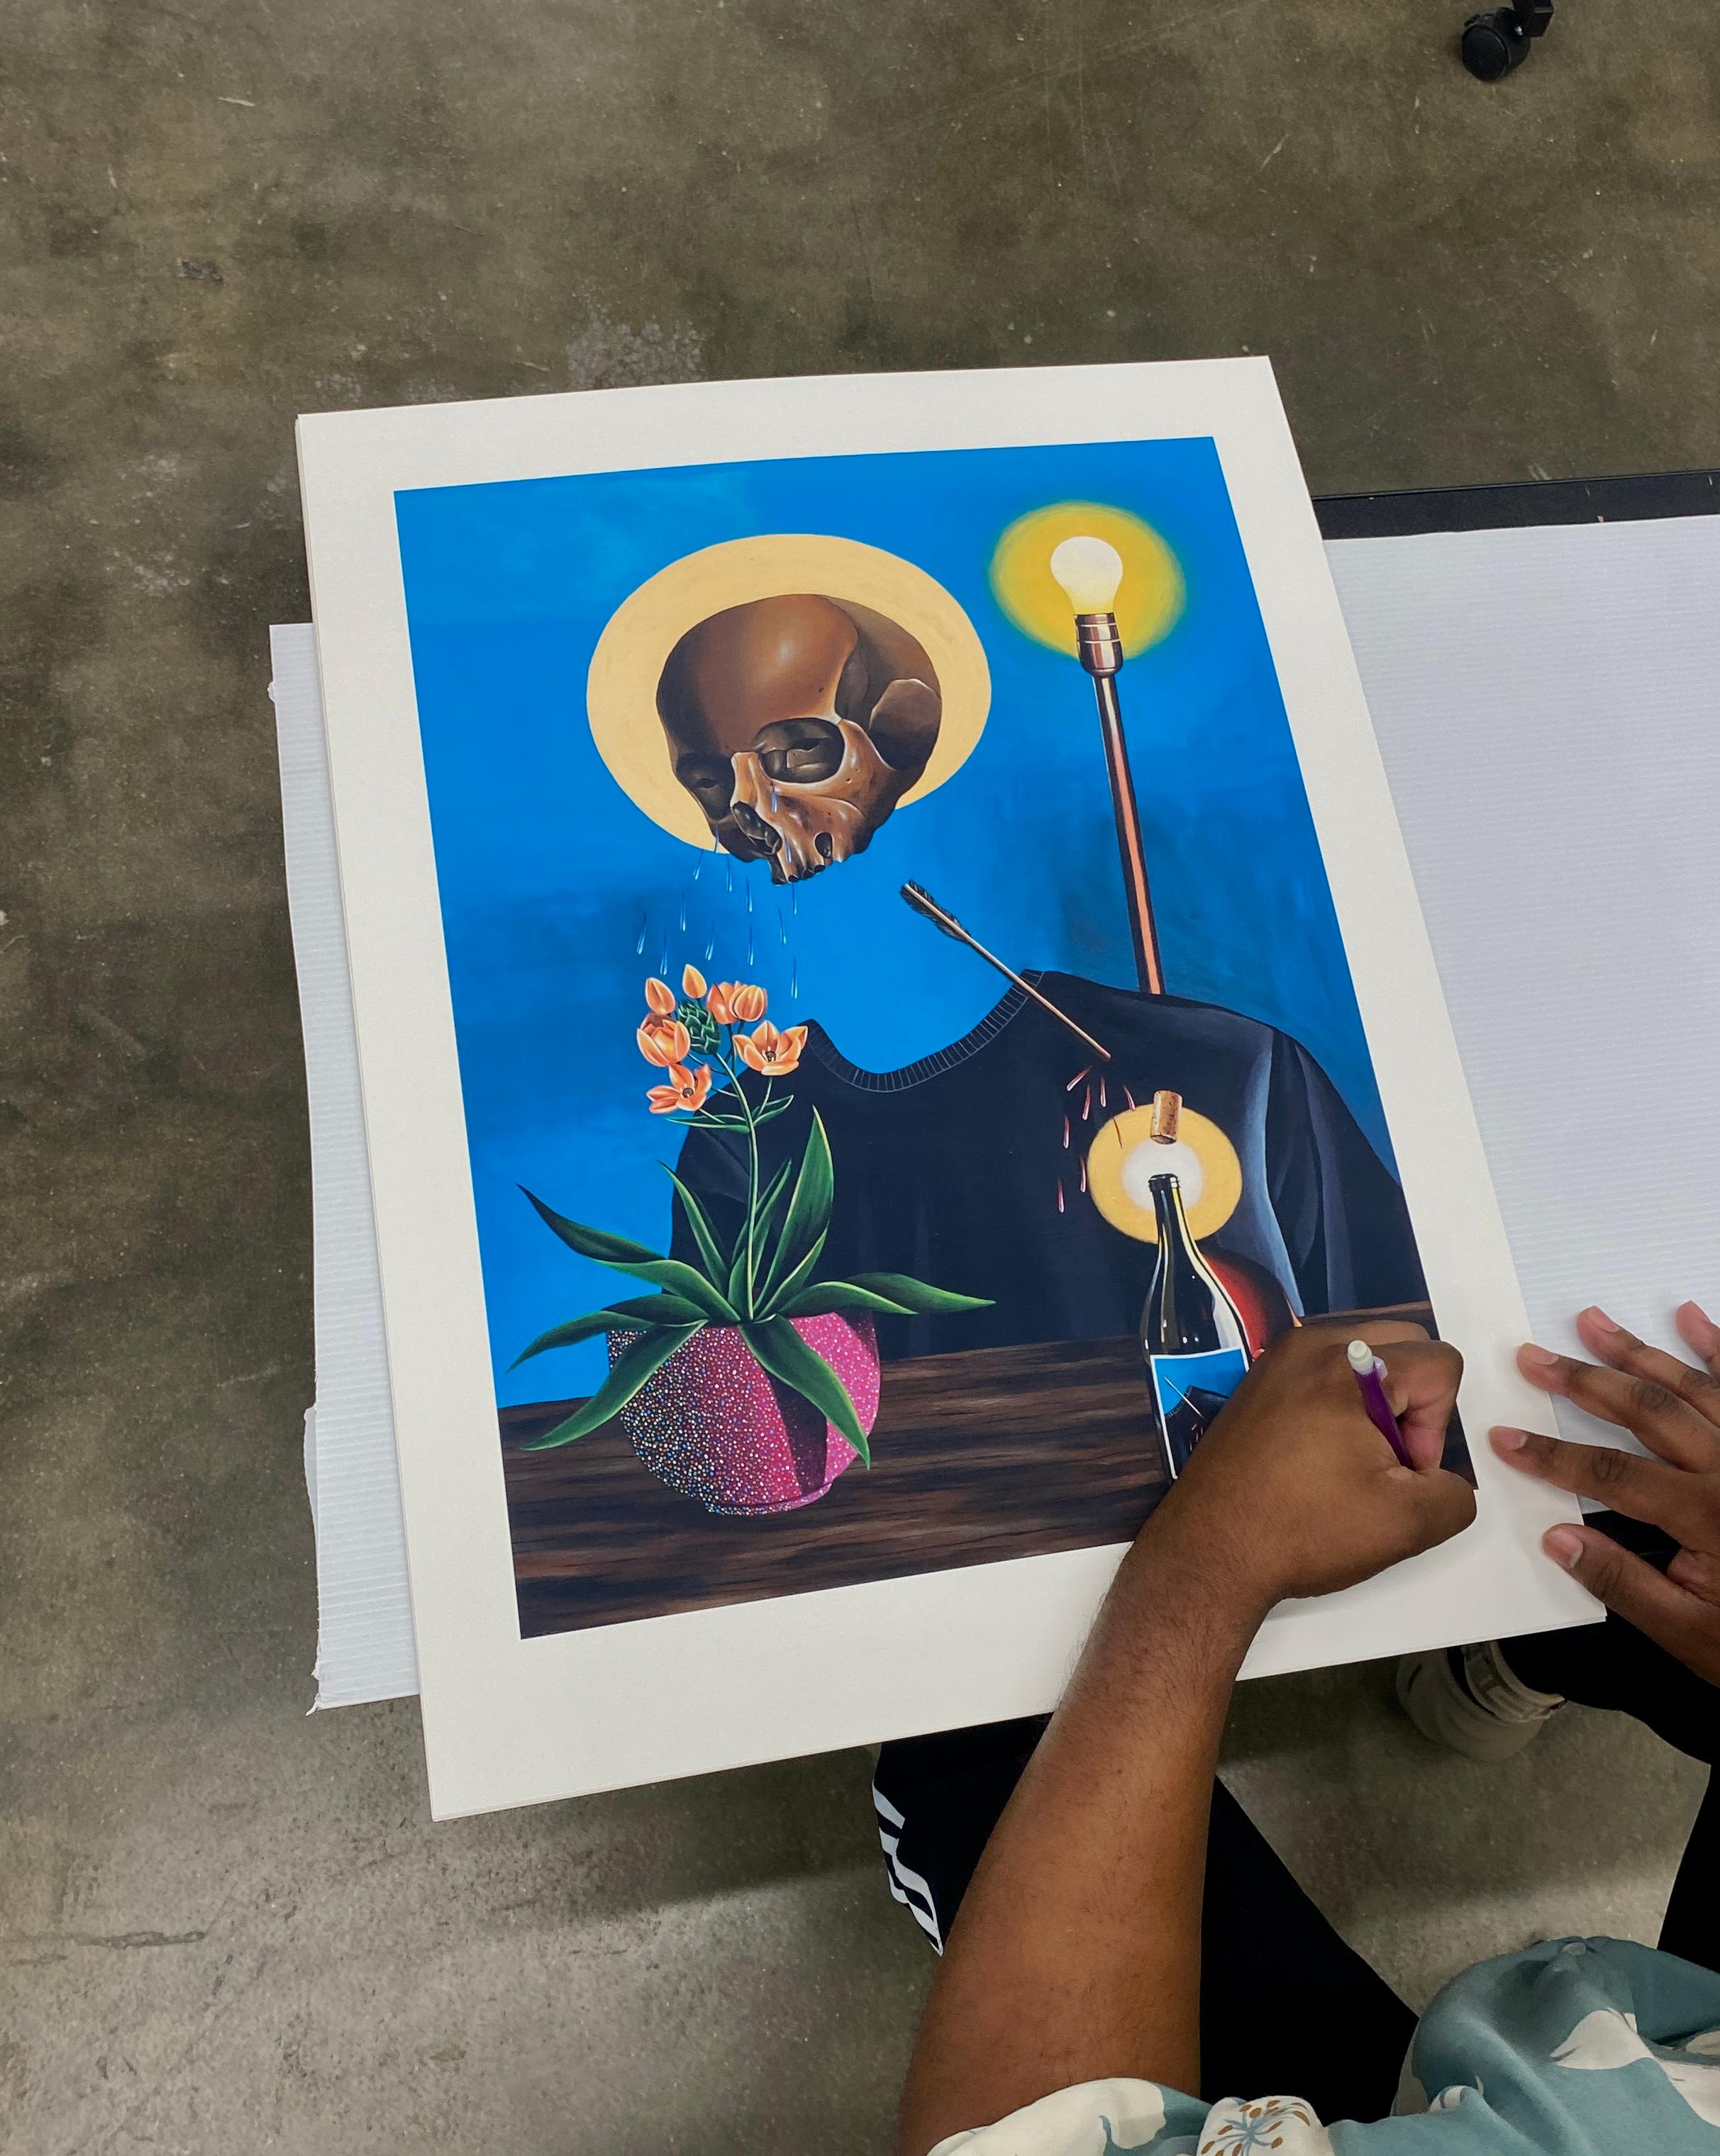 First ever set of limited edition prints by Houston-based artist Jaylen Pigford, printed in Austin, TX. The Growth print is an archival ink jet print, edition of 50. All prints are signed by the artist. 

In this latest series of work, Pigford